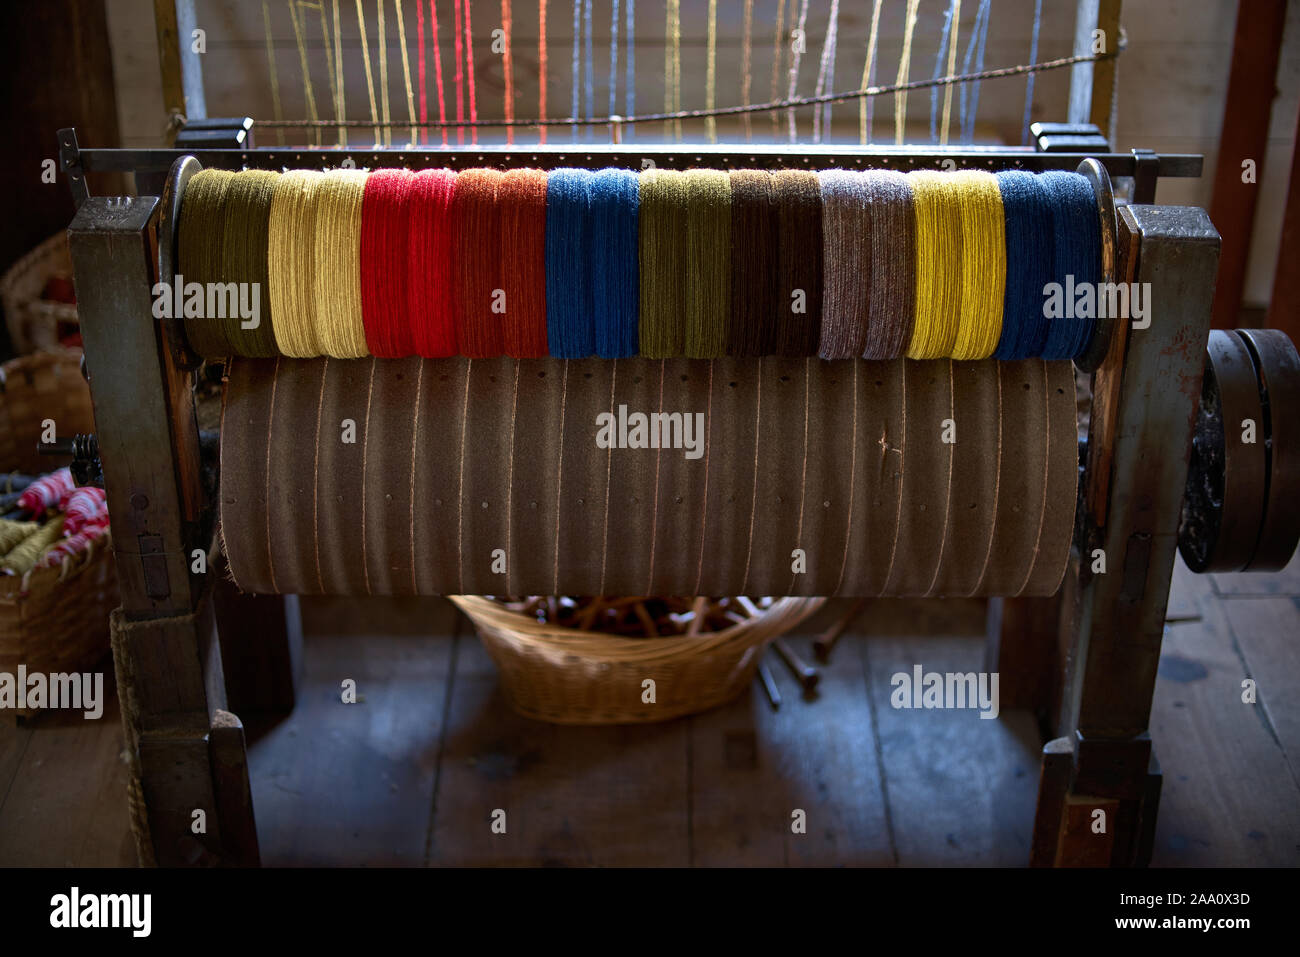 Spools of colored thread that were used in a woolen mill 1800's and early 1900's. colored woolen threads on an old loom, Traditional Yarn in Canada. Stock Photo